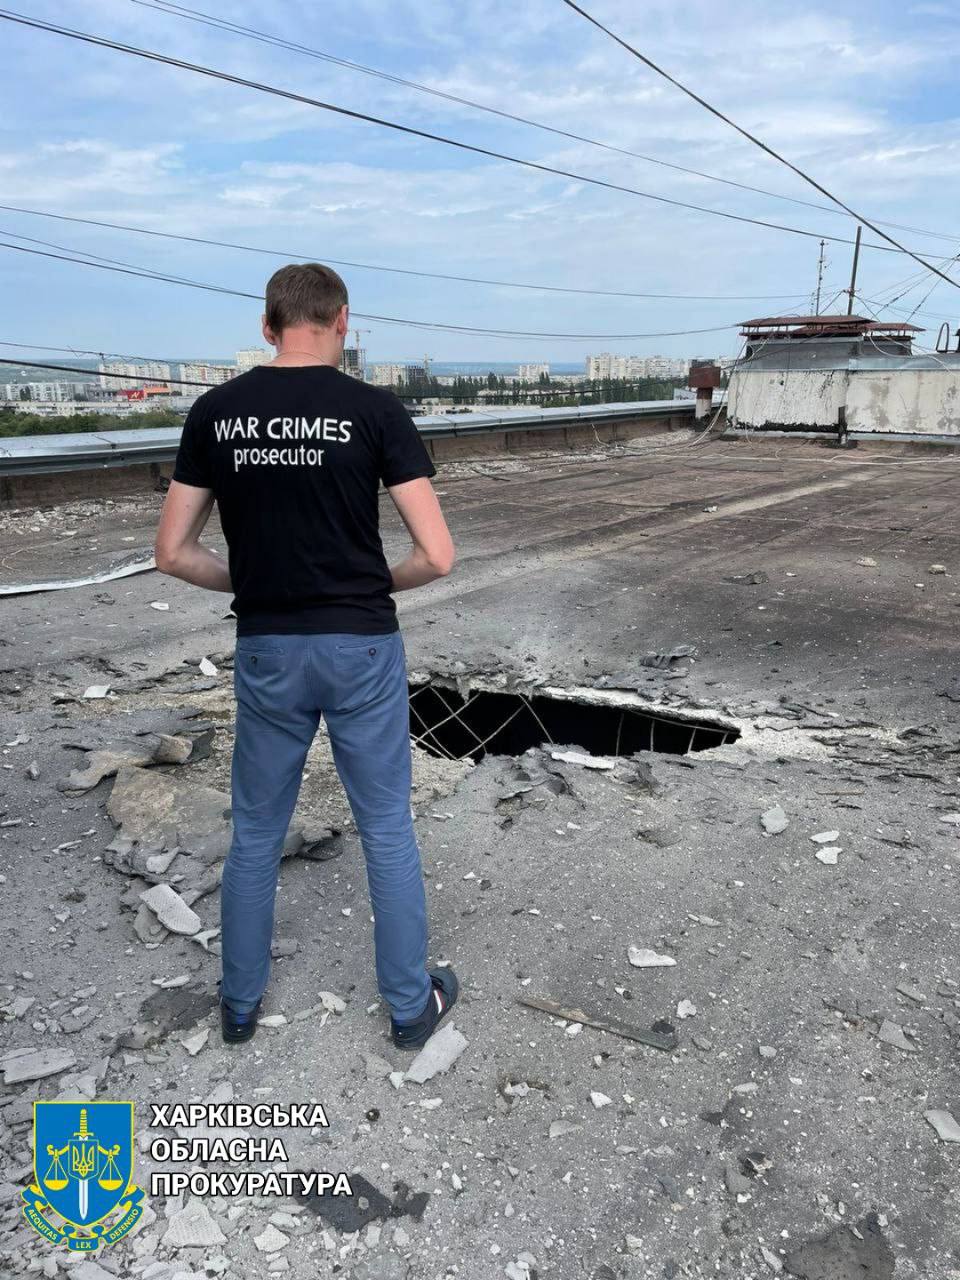 A hole in the roof of a nine-story building in Kharkov from a Russian bullet